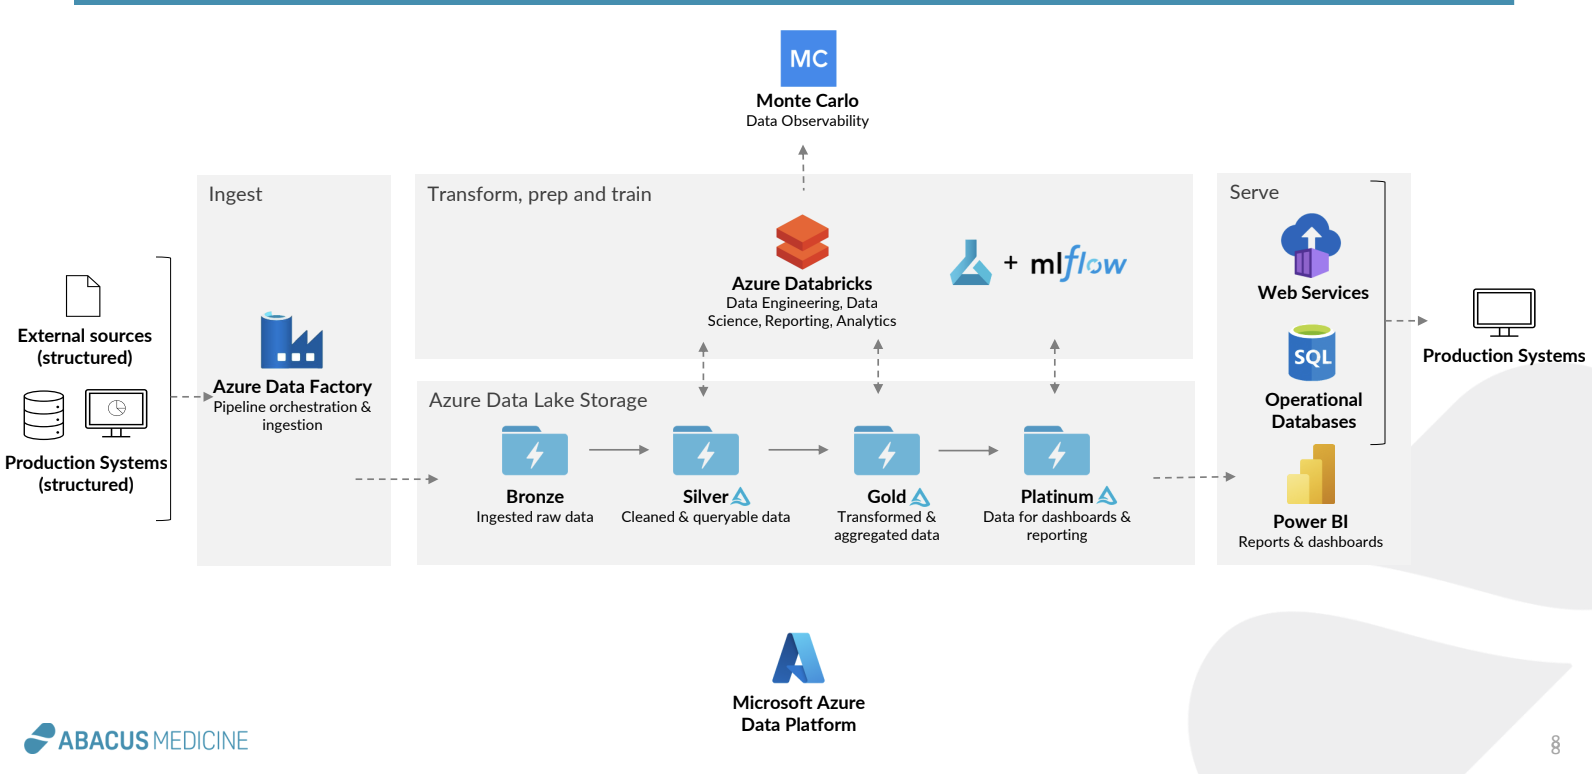 How Abacus Medicine Built a Modern Data and AI Stack with Databricks and Monte Carlo